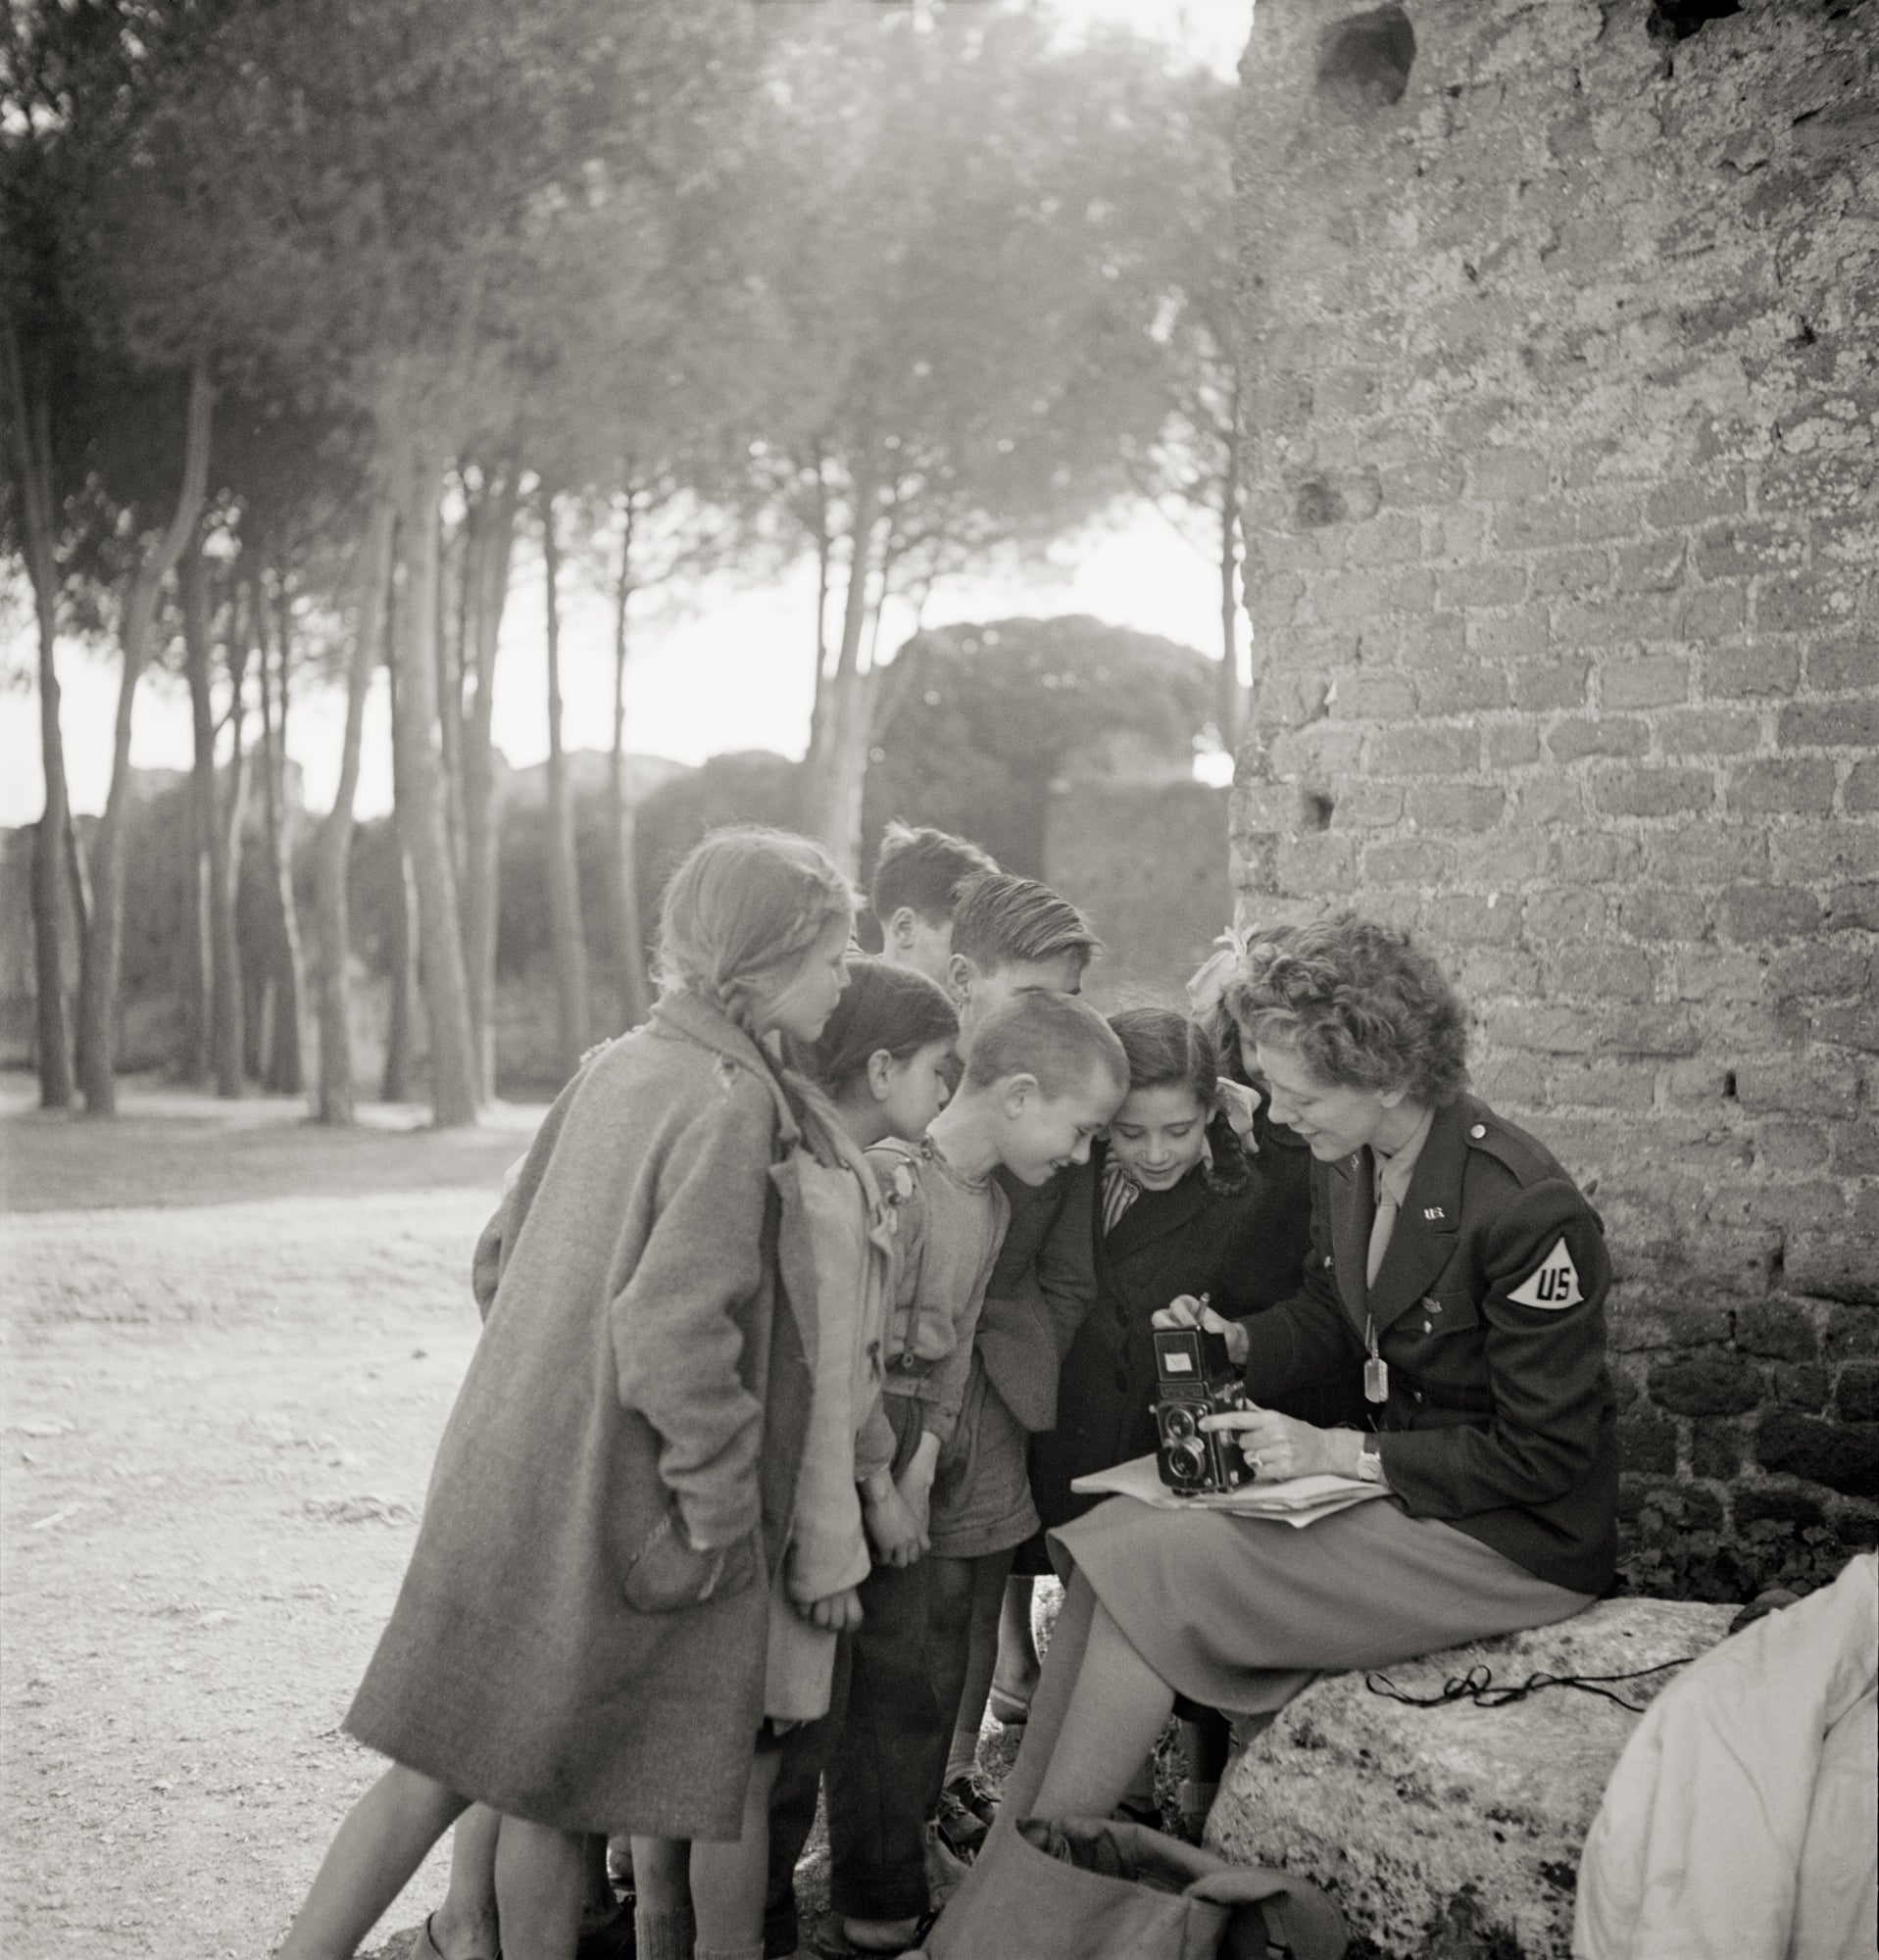 Photographer Toni Frissell shows her camera to children in Europe  1945 photograph Collection of Library of Congress LC-DIG-ppmsca-19005  R2021.2001.001